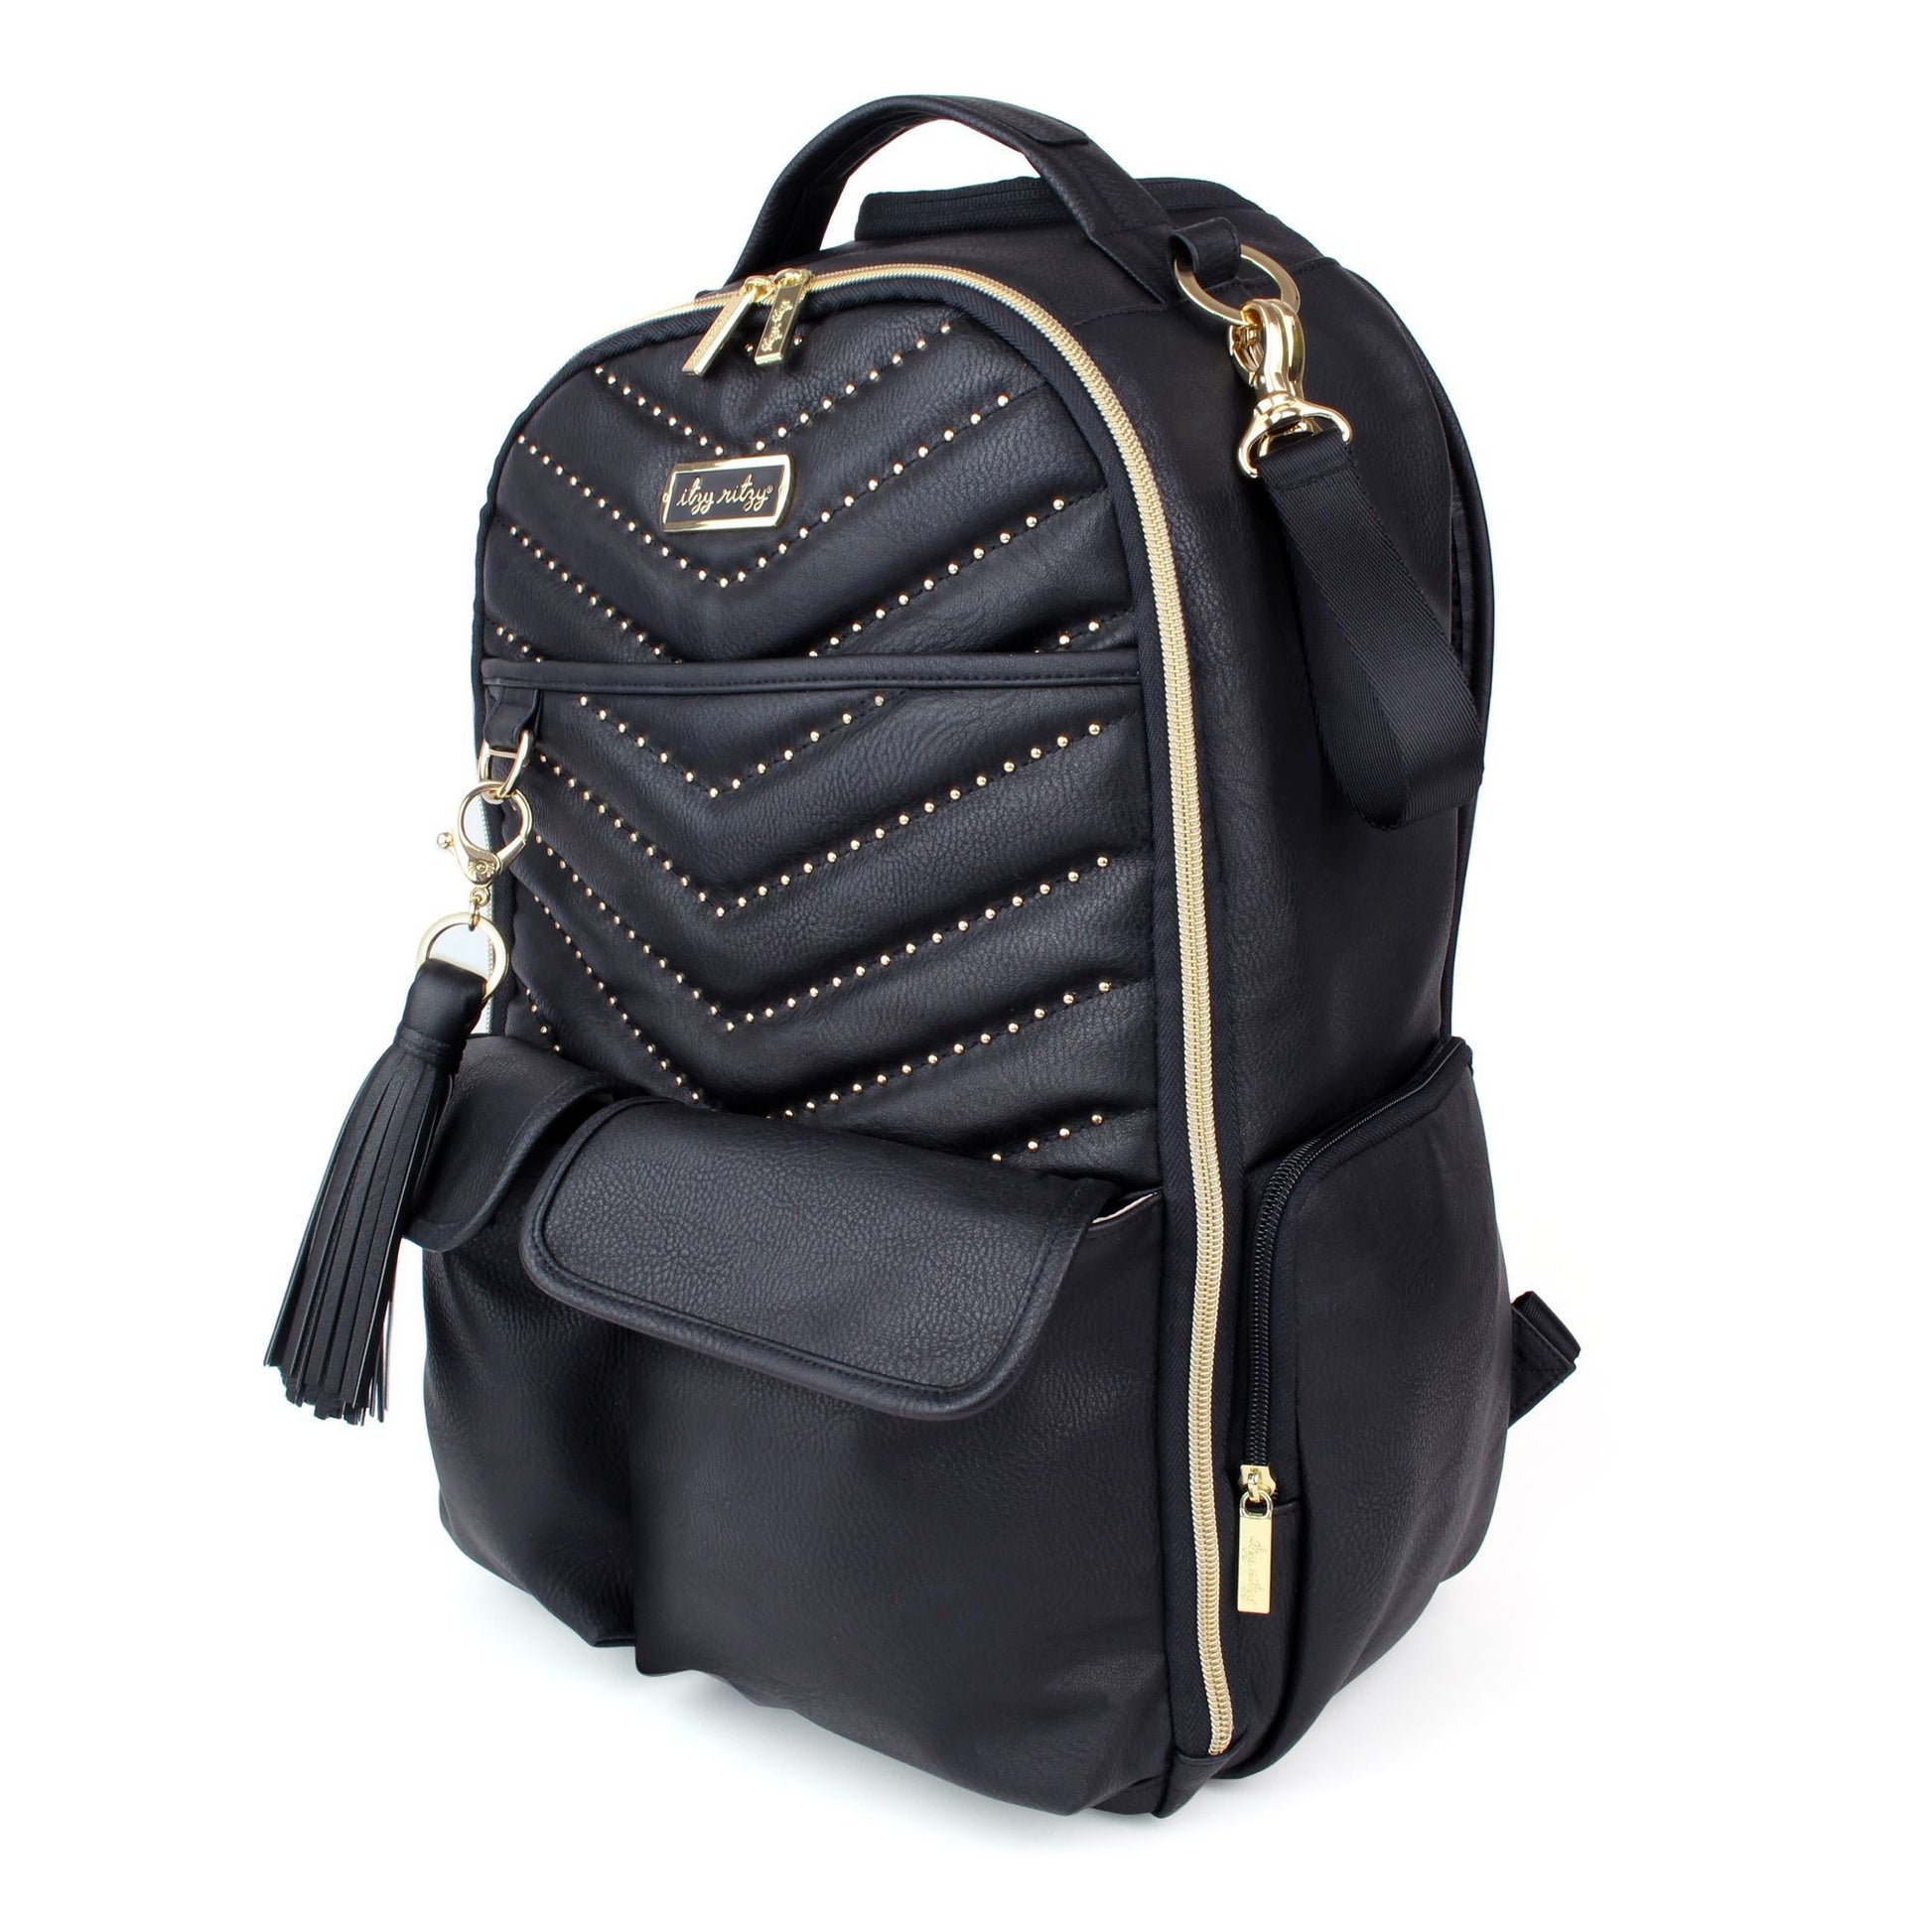 Backpack Bag - Black, Pink More | Itzy Ritzy